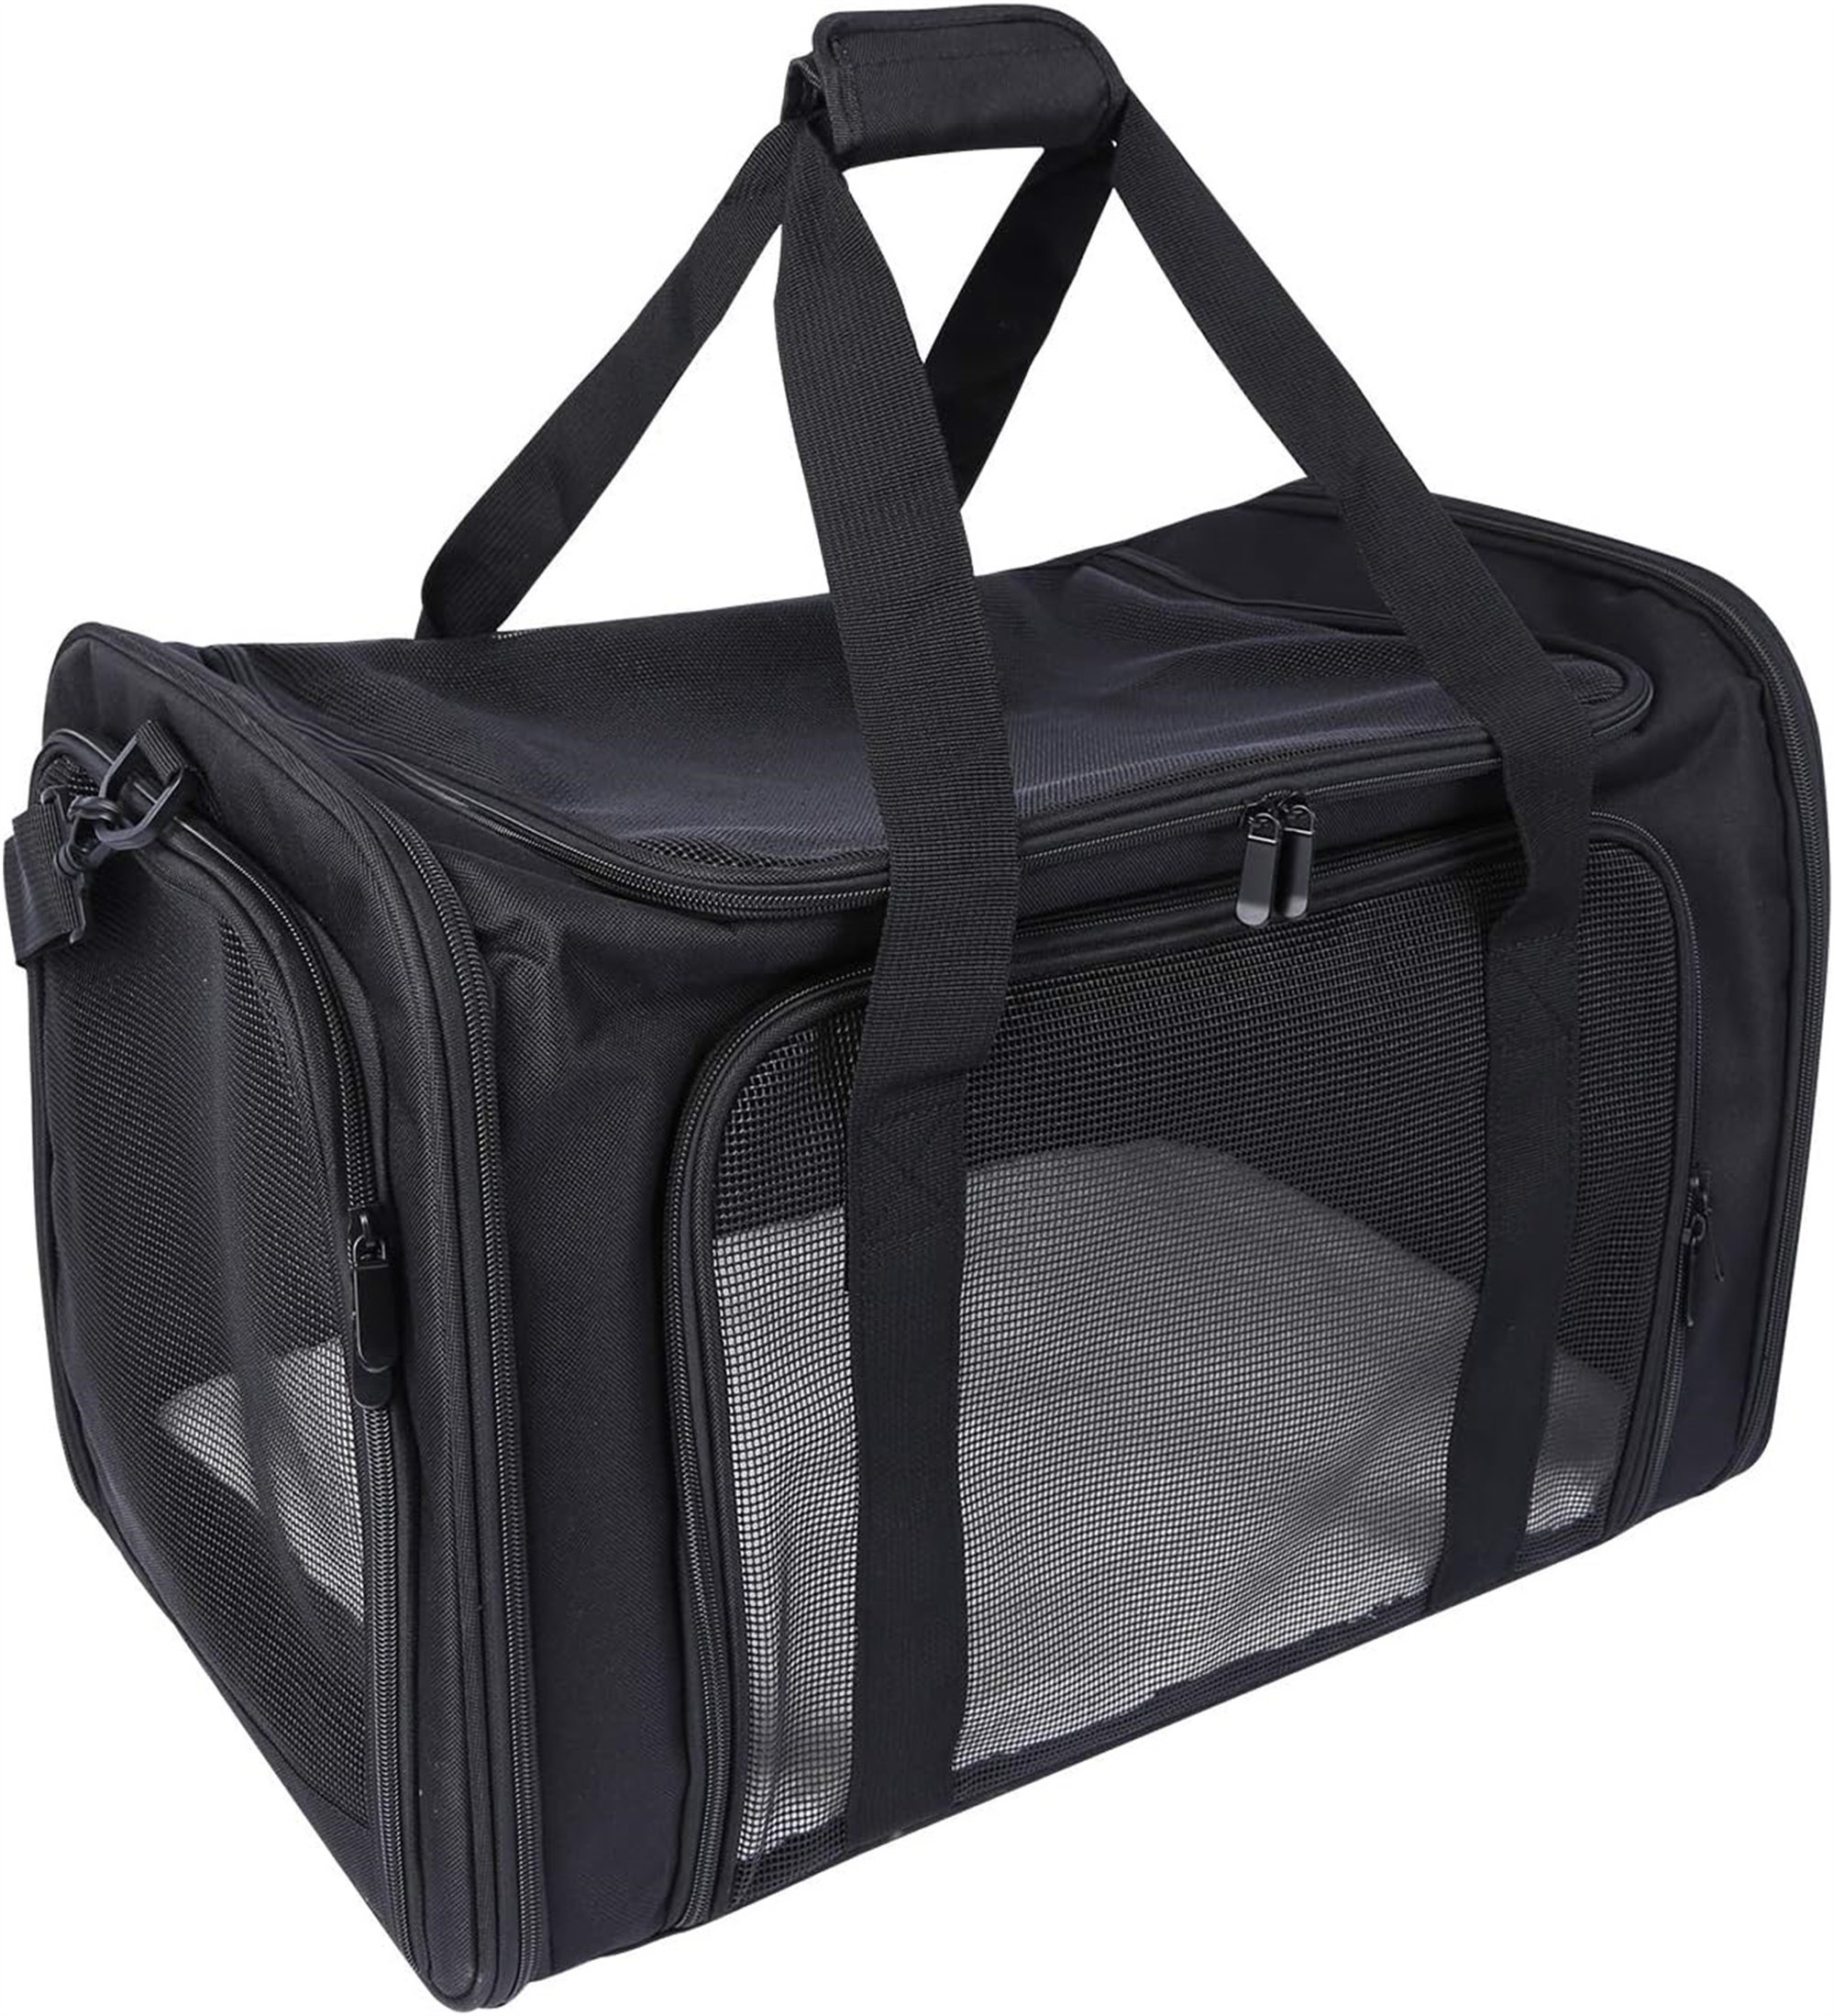 TSA Approved Airline Travel Pet Carrier for Cats, Dogs, Small Animals -  Comfortable, Safe, and Durable with Side & Top Opening, Air Vents,  Collapsible